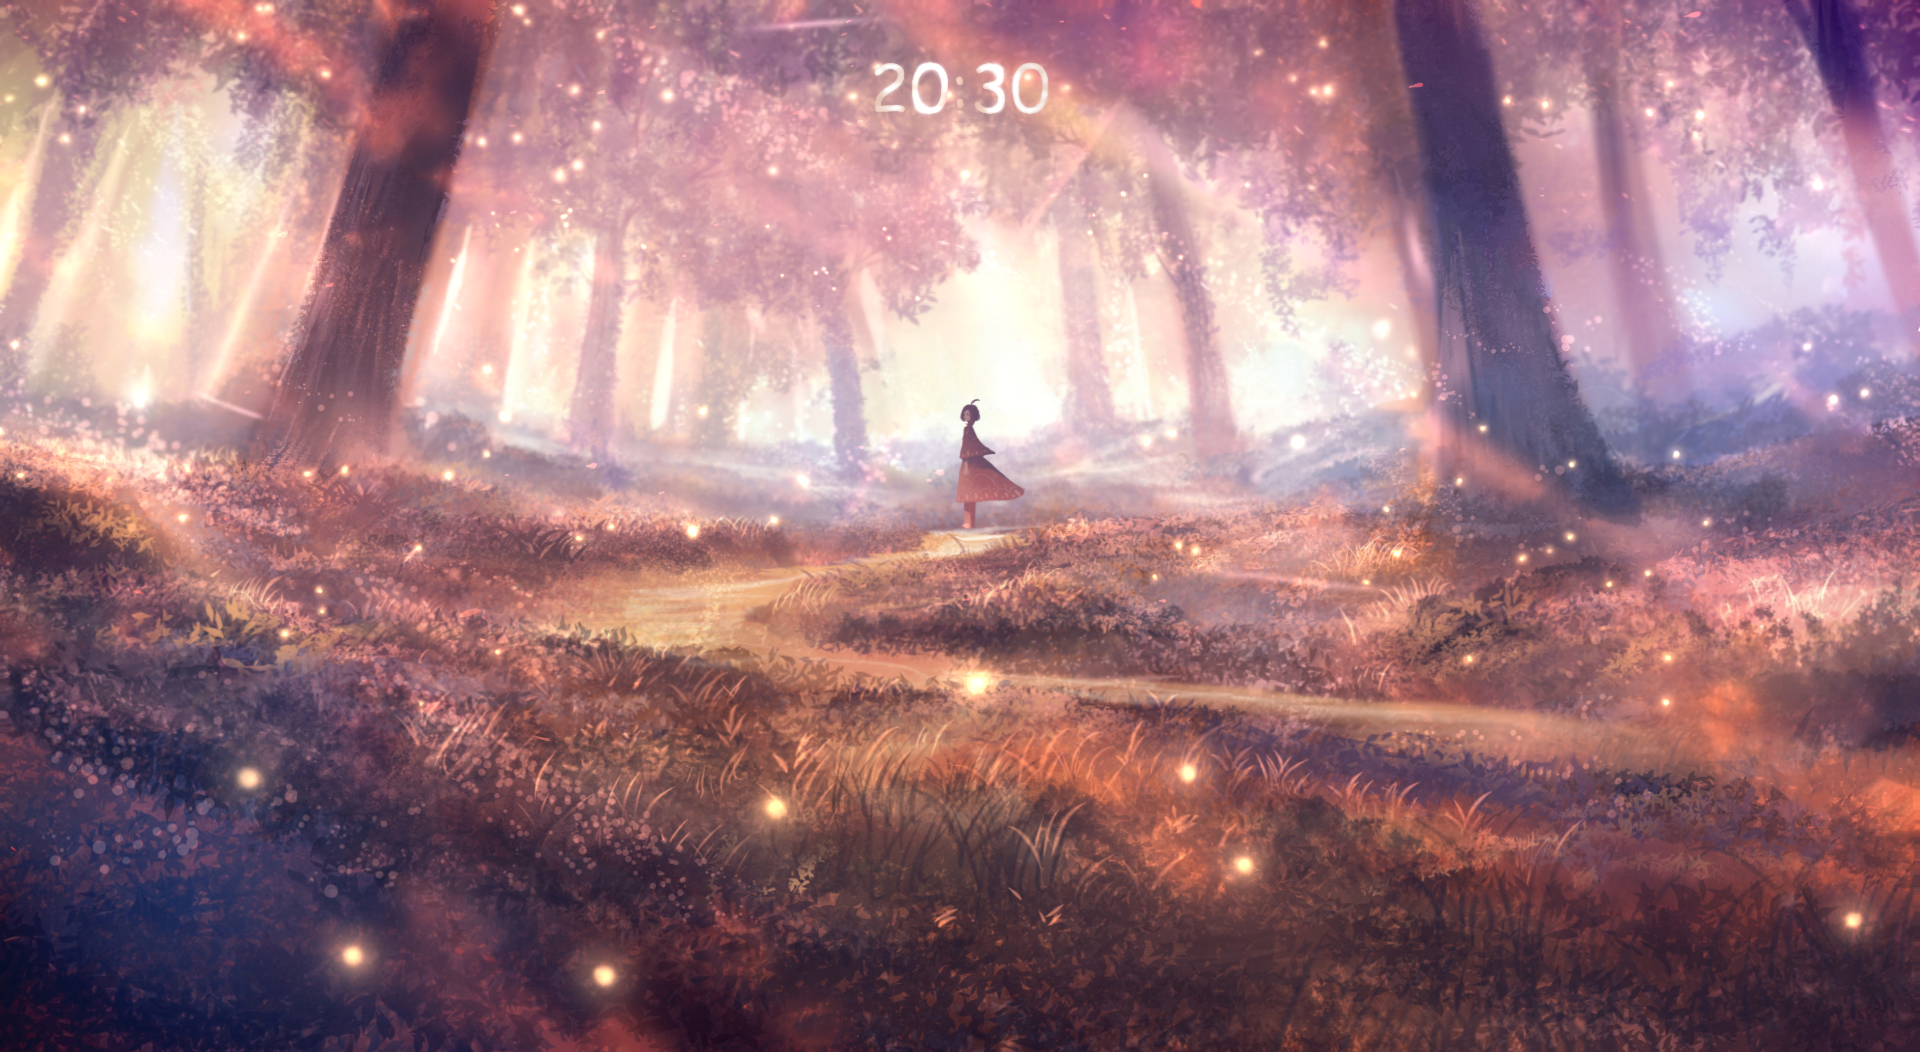 Autumn Shadow is among us live wallpaper [DOWNLOAD FREE]